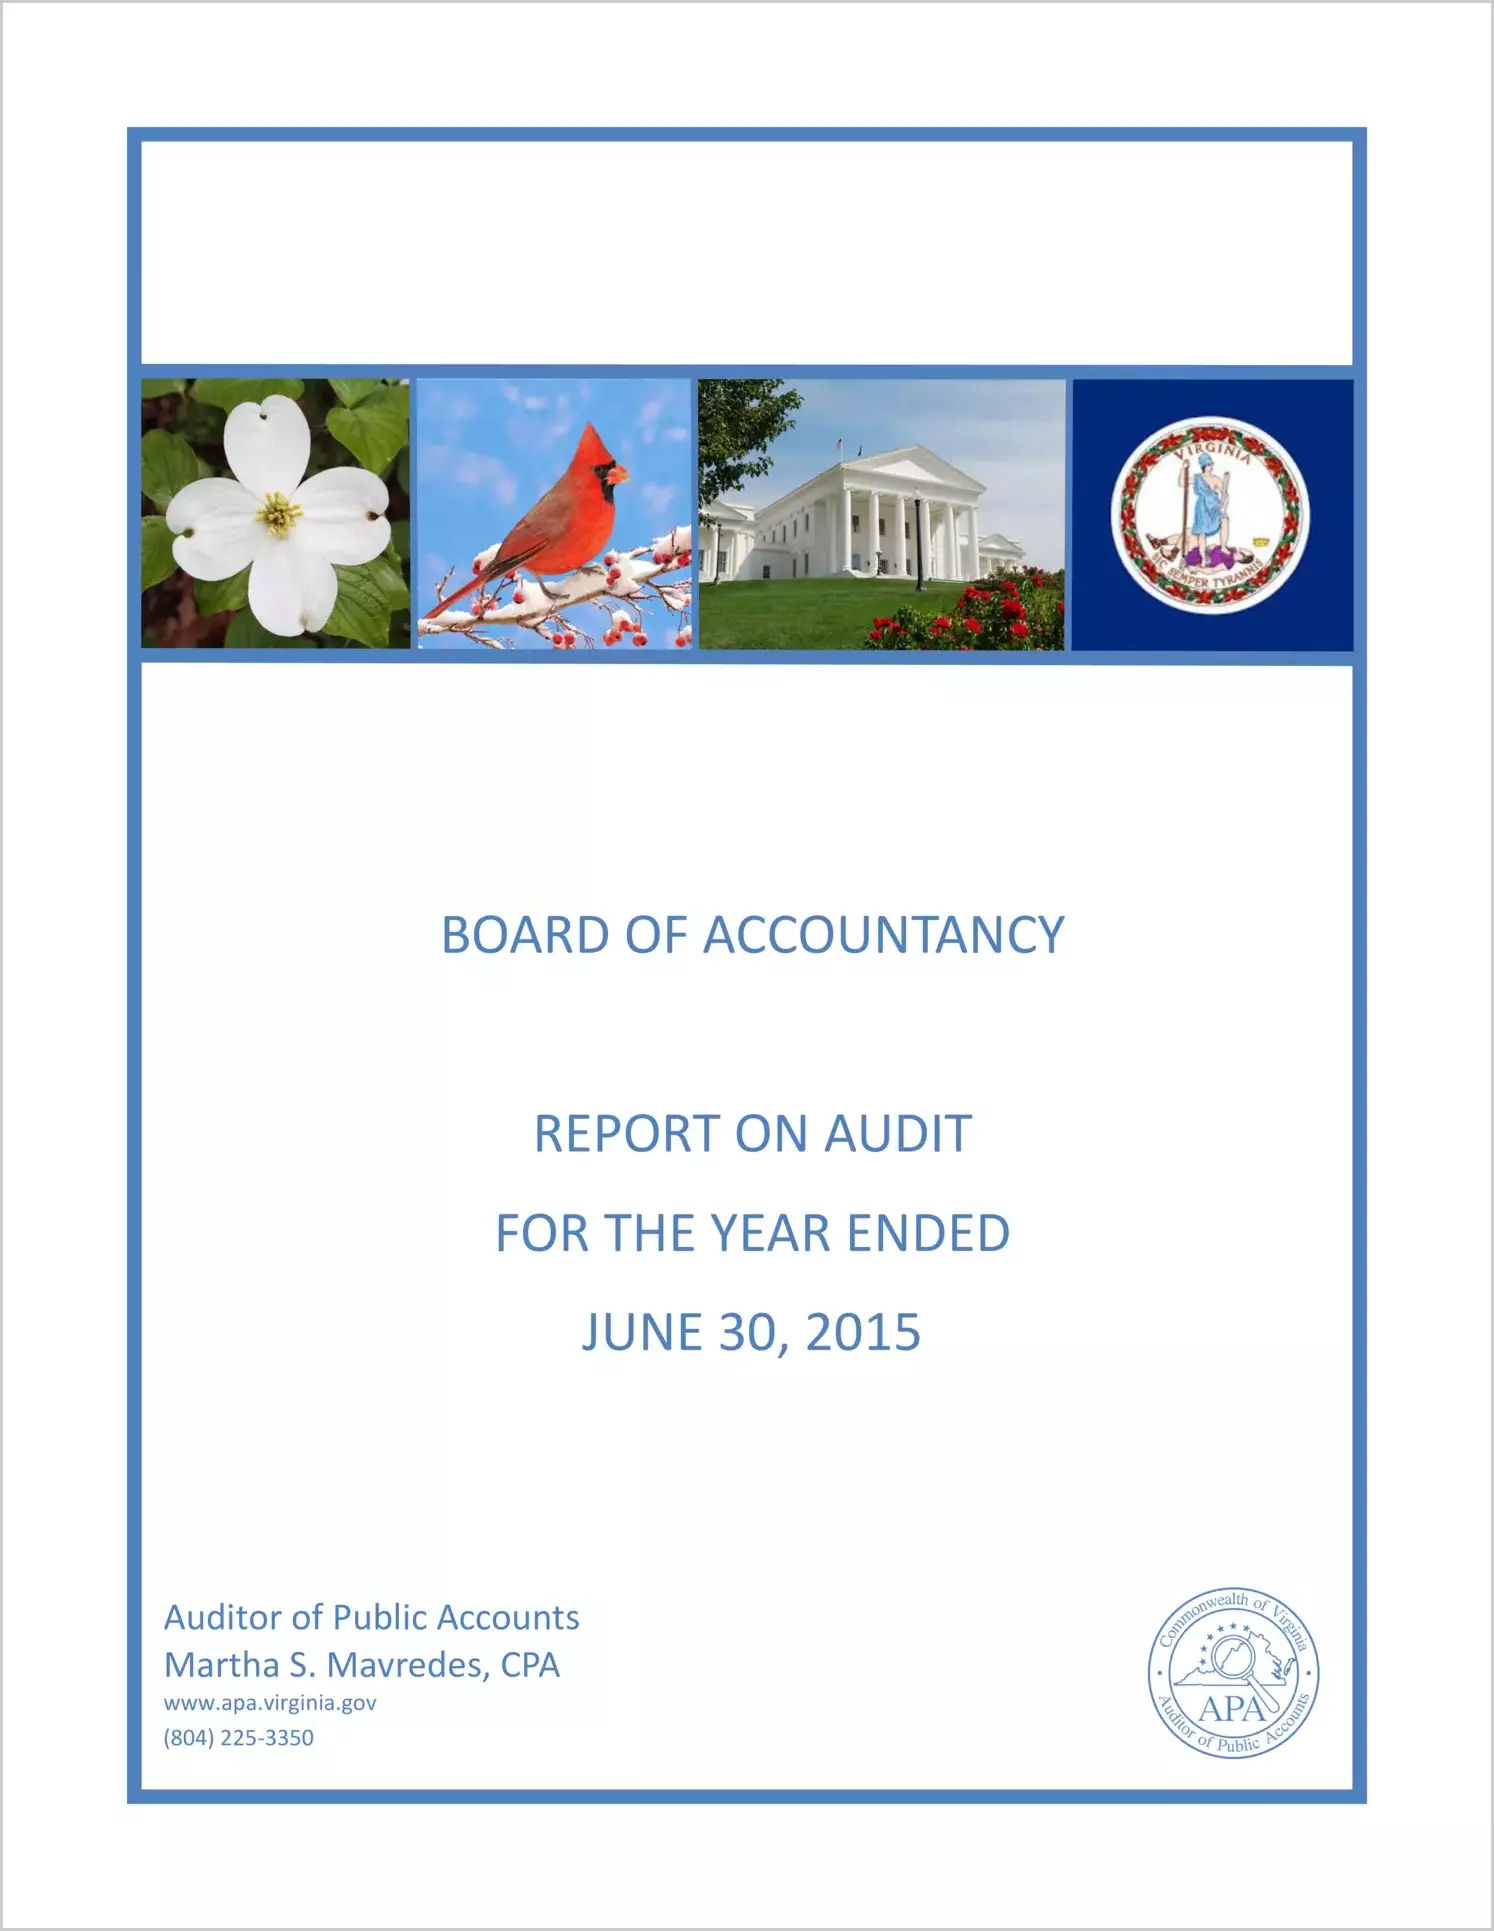 Board of Accountancy for the year ended June 30, 2015